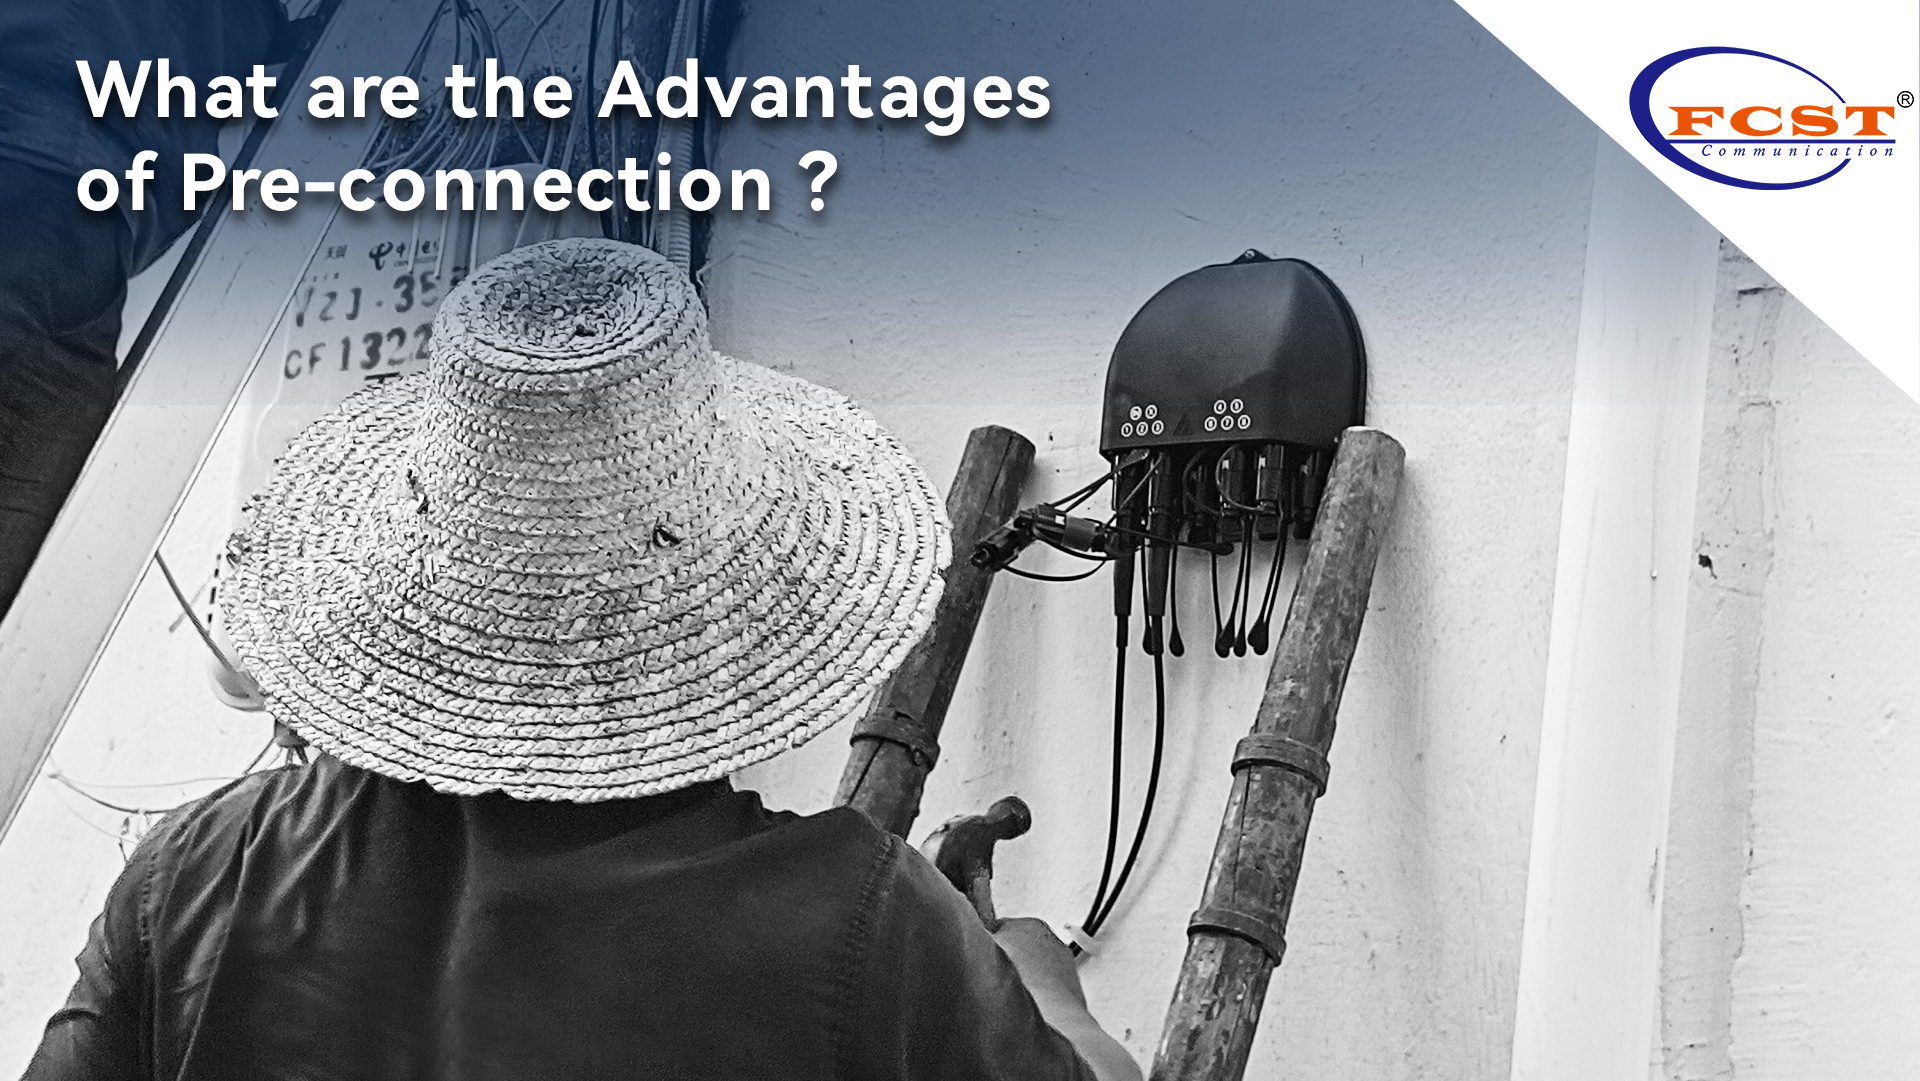 What are the Advantages of Pre-connection